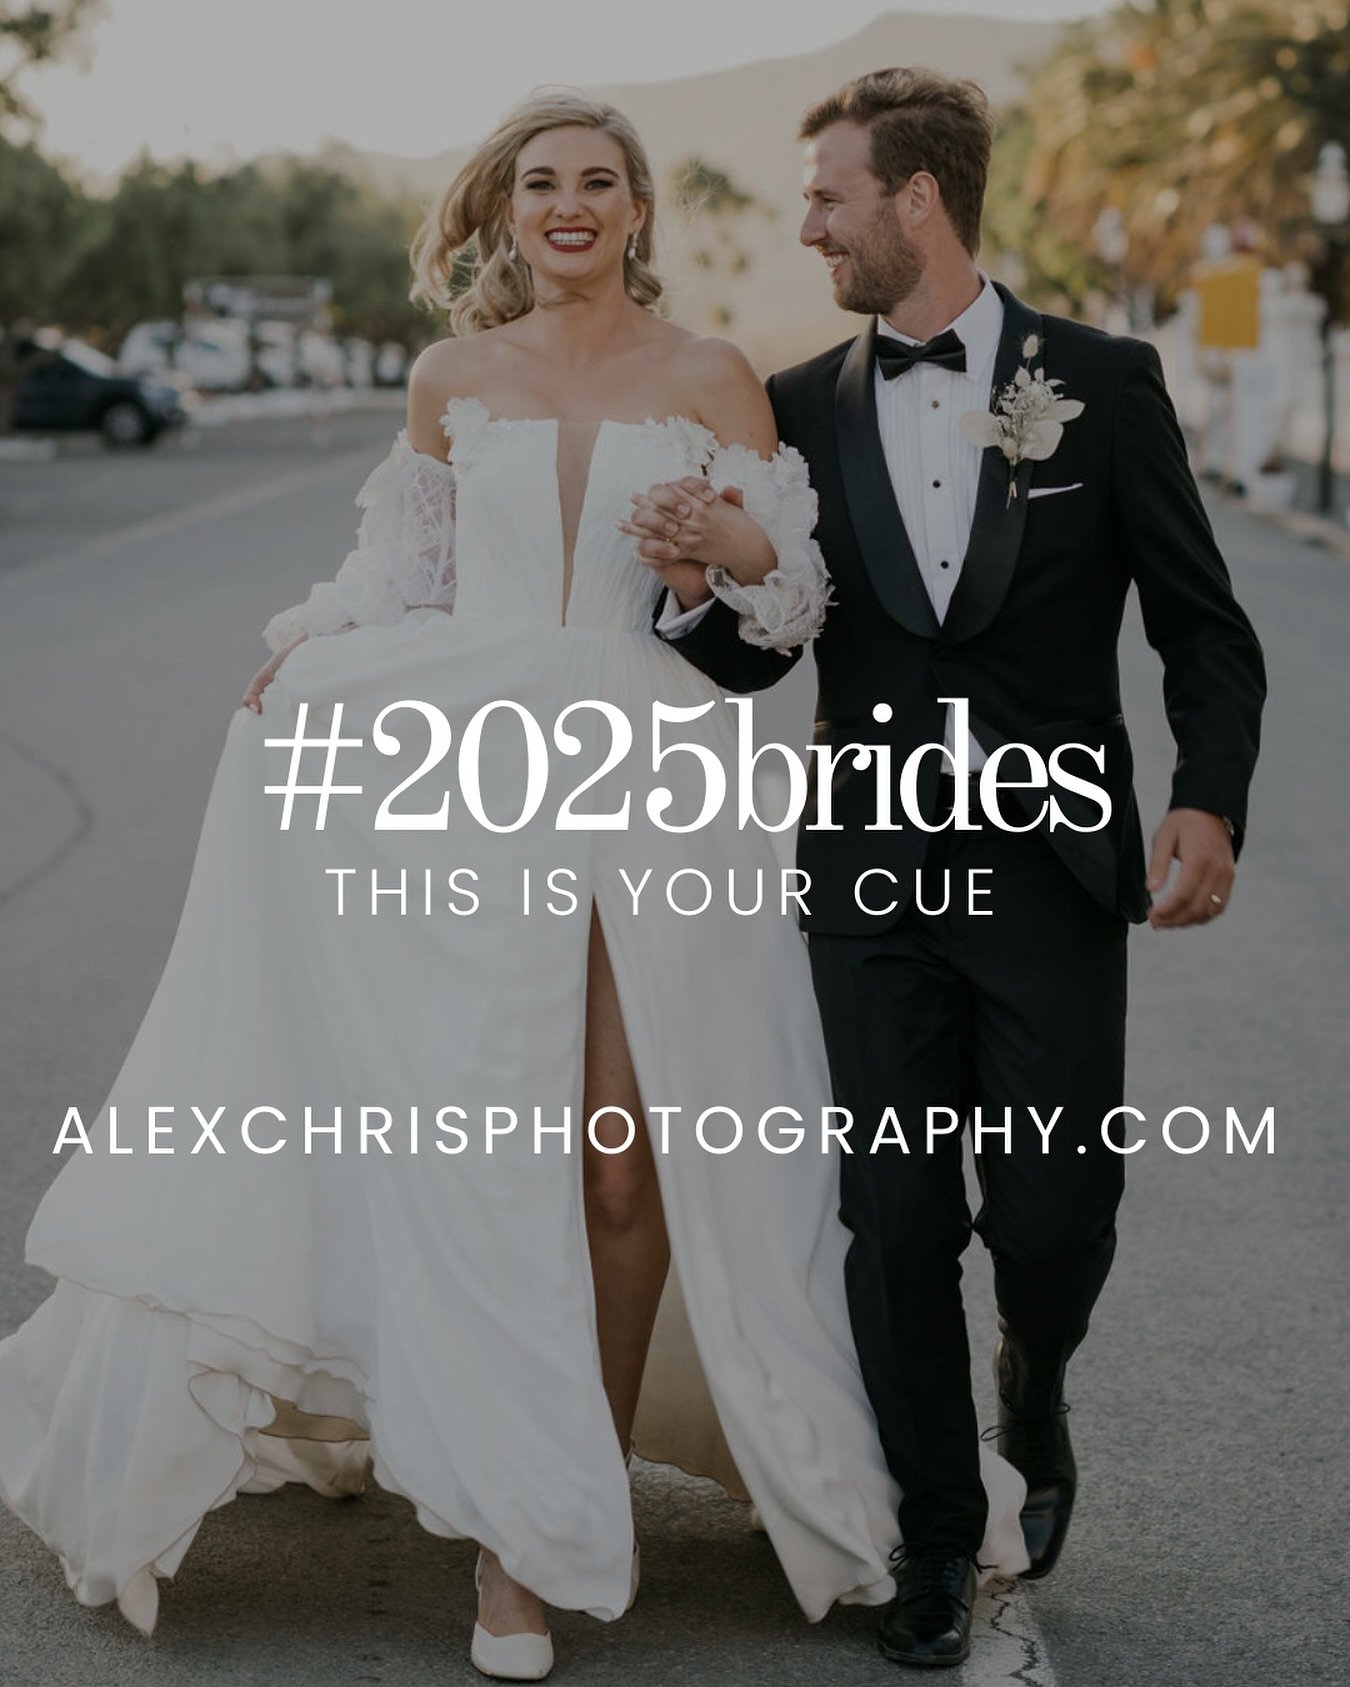 Getting married in 2025? This is your cue to book @ac_tography as your wedding photographer. 

Send us a DM or email for our wedding packages. Now also offering a Photo and Film collaboration package.